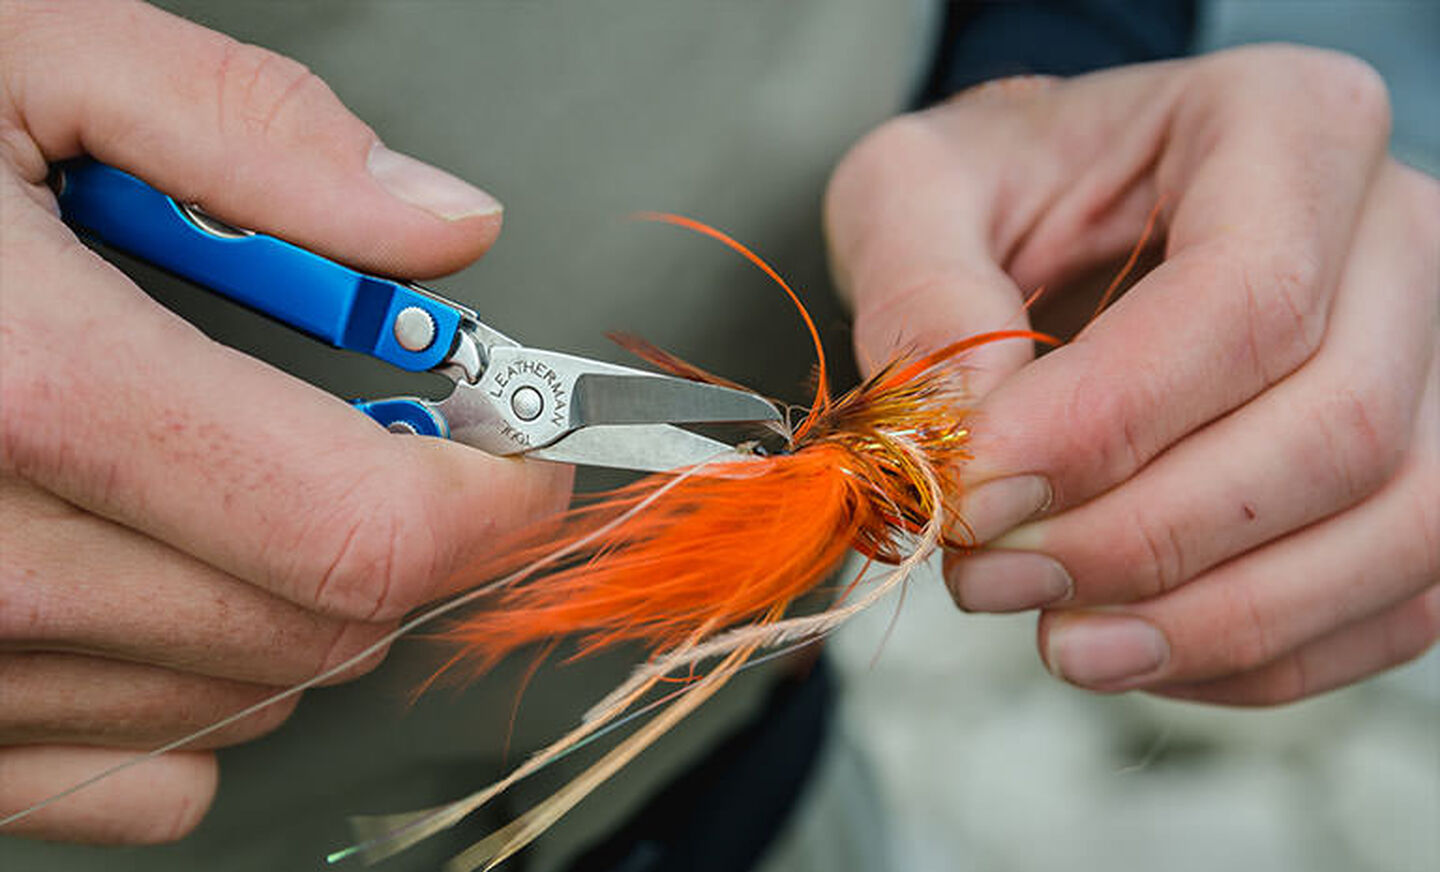 Man using blue Leatherman Micra to cut fishing line from fishing bait